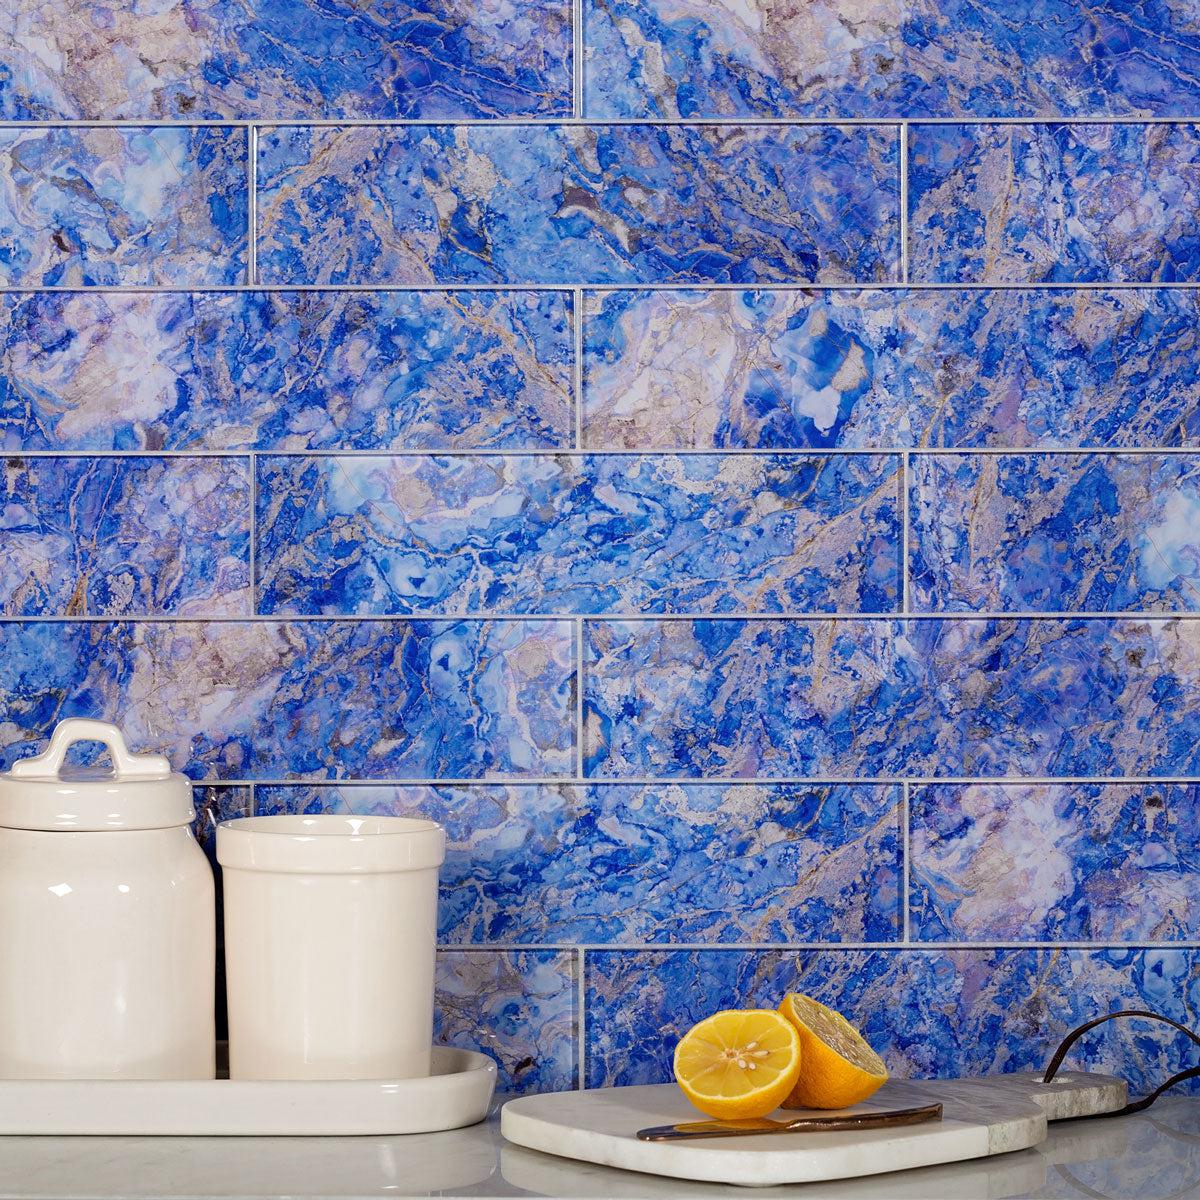 Blue and Yellow Kitchen Design with Celestial Sky Lapis Glass Tile